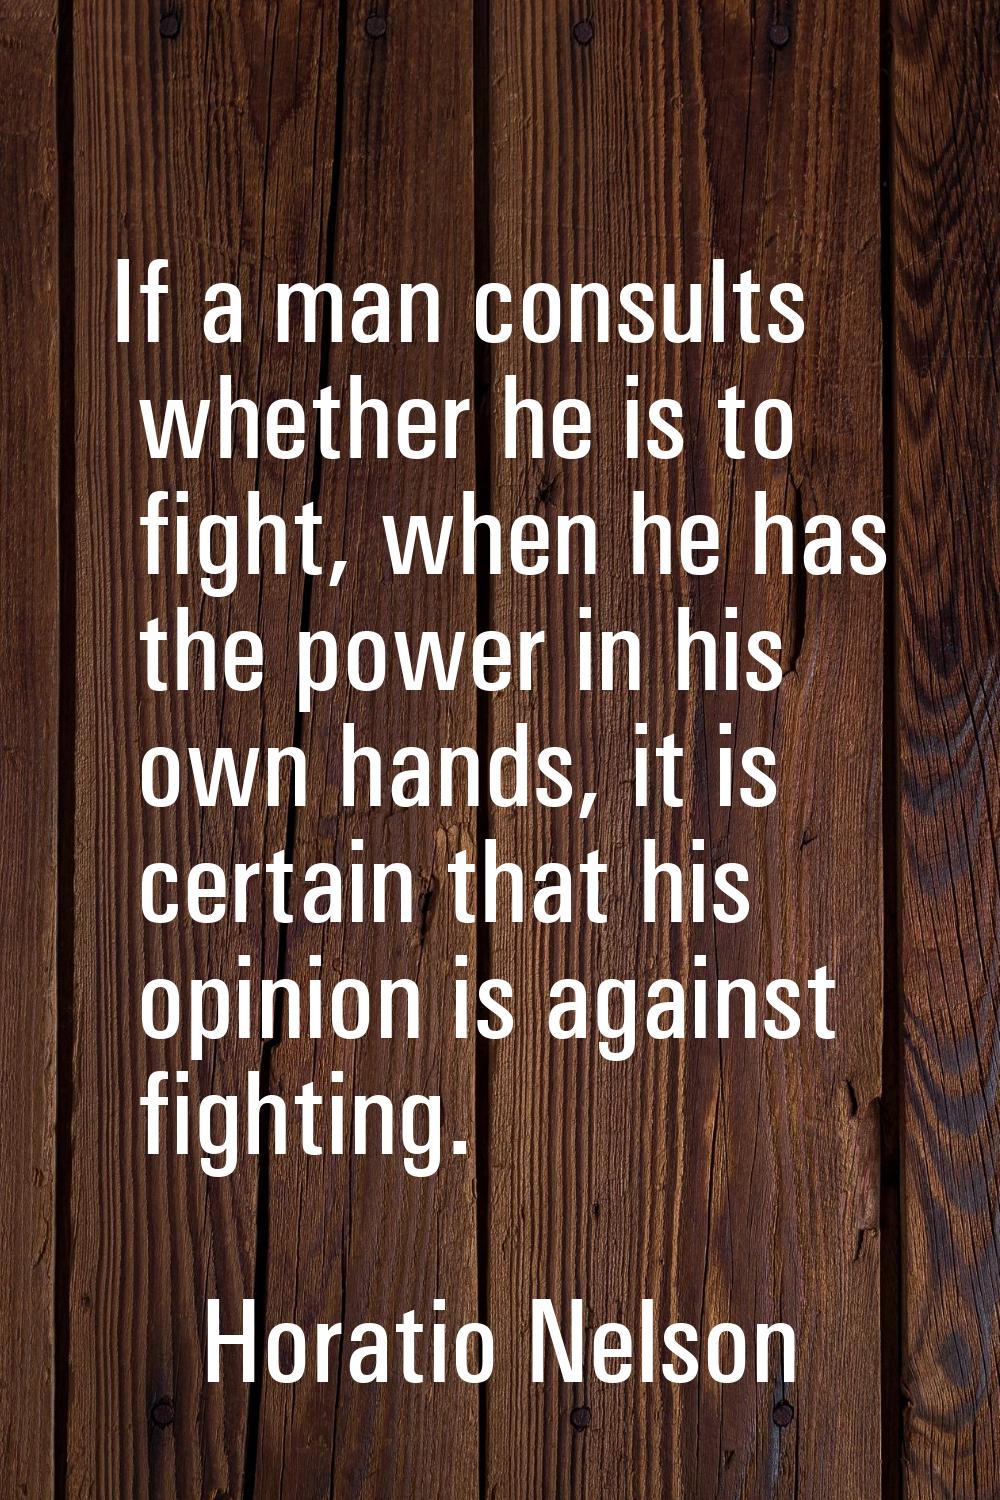 If a man consults whether he is to fight, when he has the power in his own hands, it is certain tha